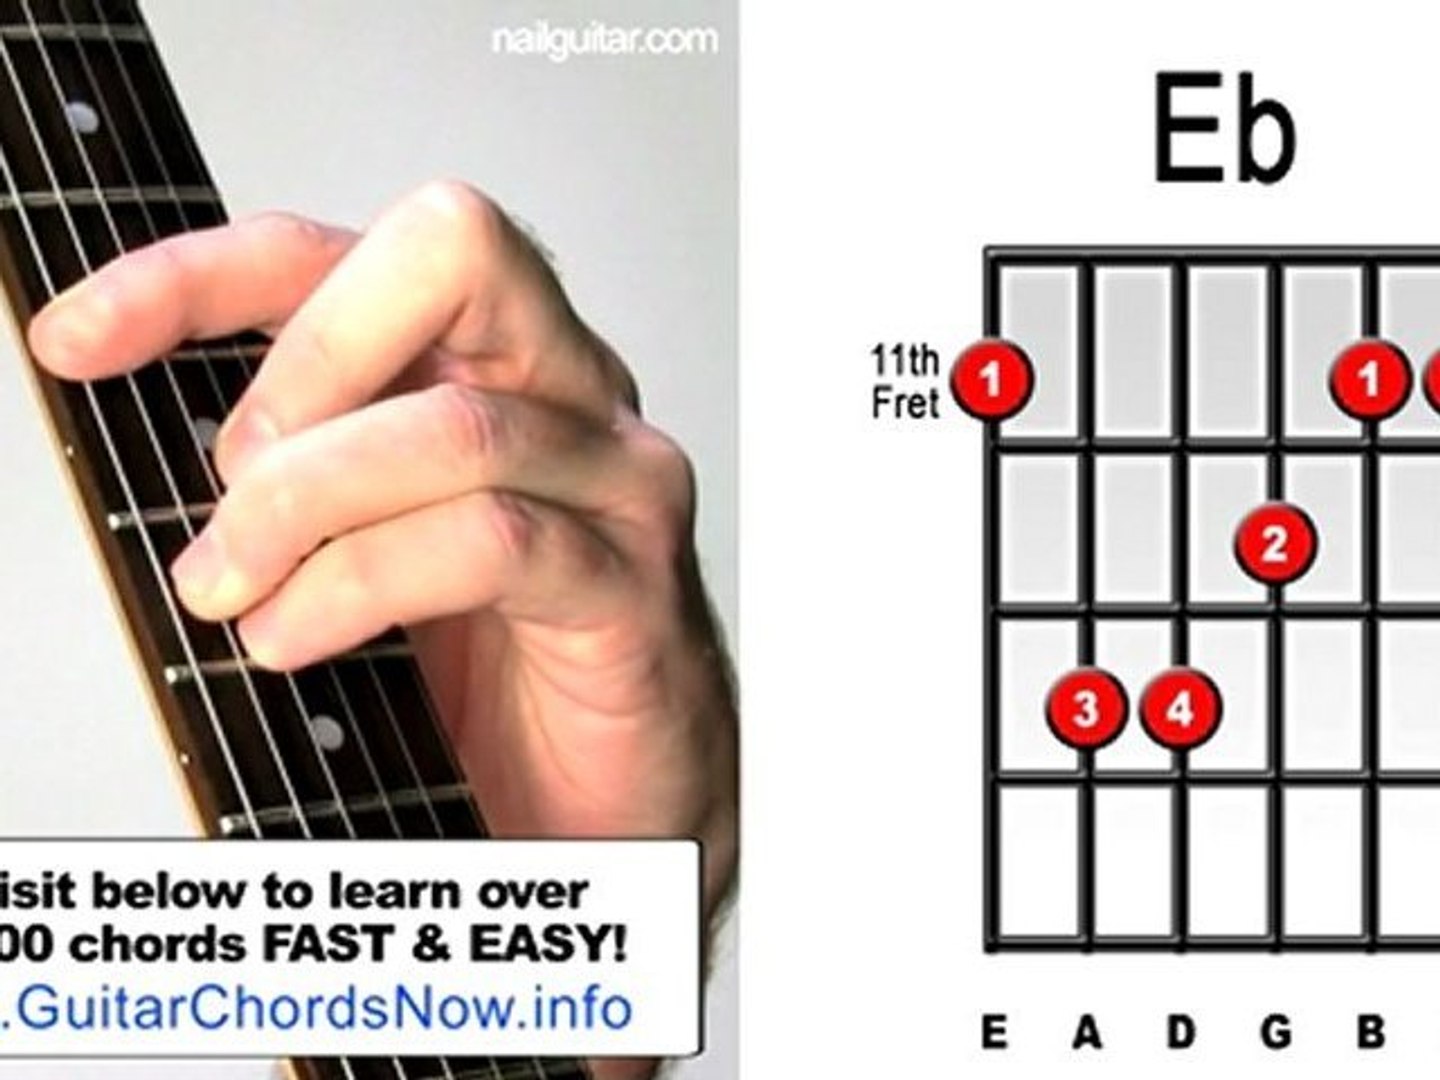 Easiest Way to Play Eb Chord on Acoustic Guitar